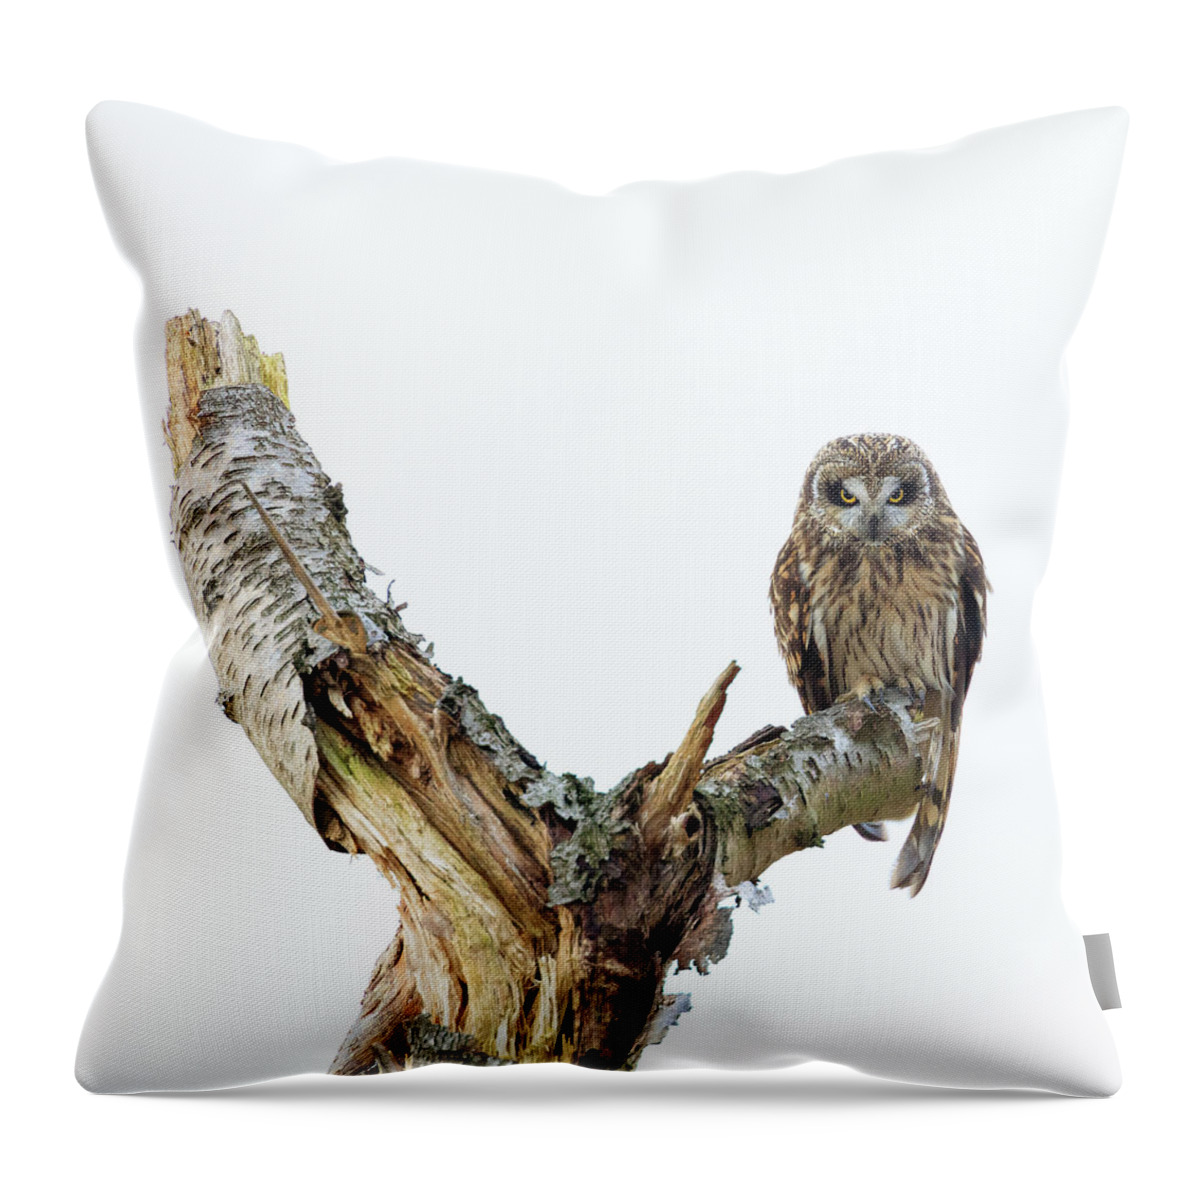 Eide Road Throw Pillow featuring the photograph Owl on Tree Stump by Briand Sanderson